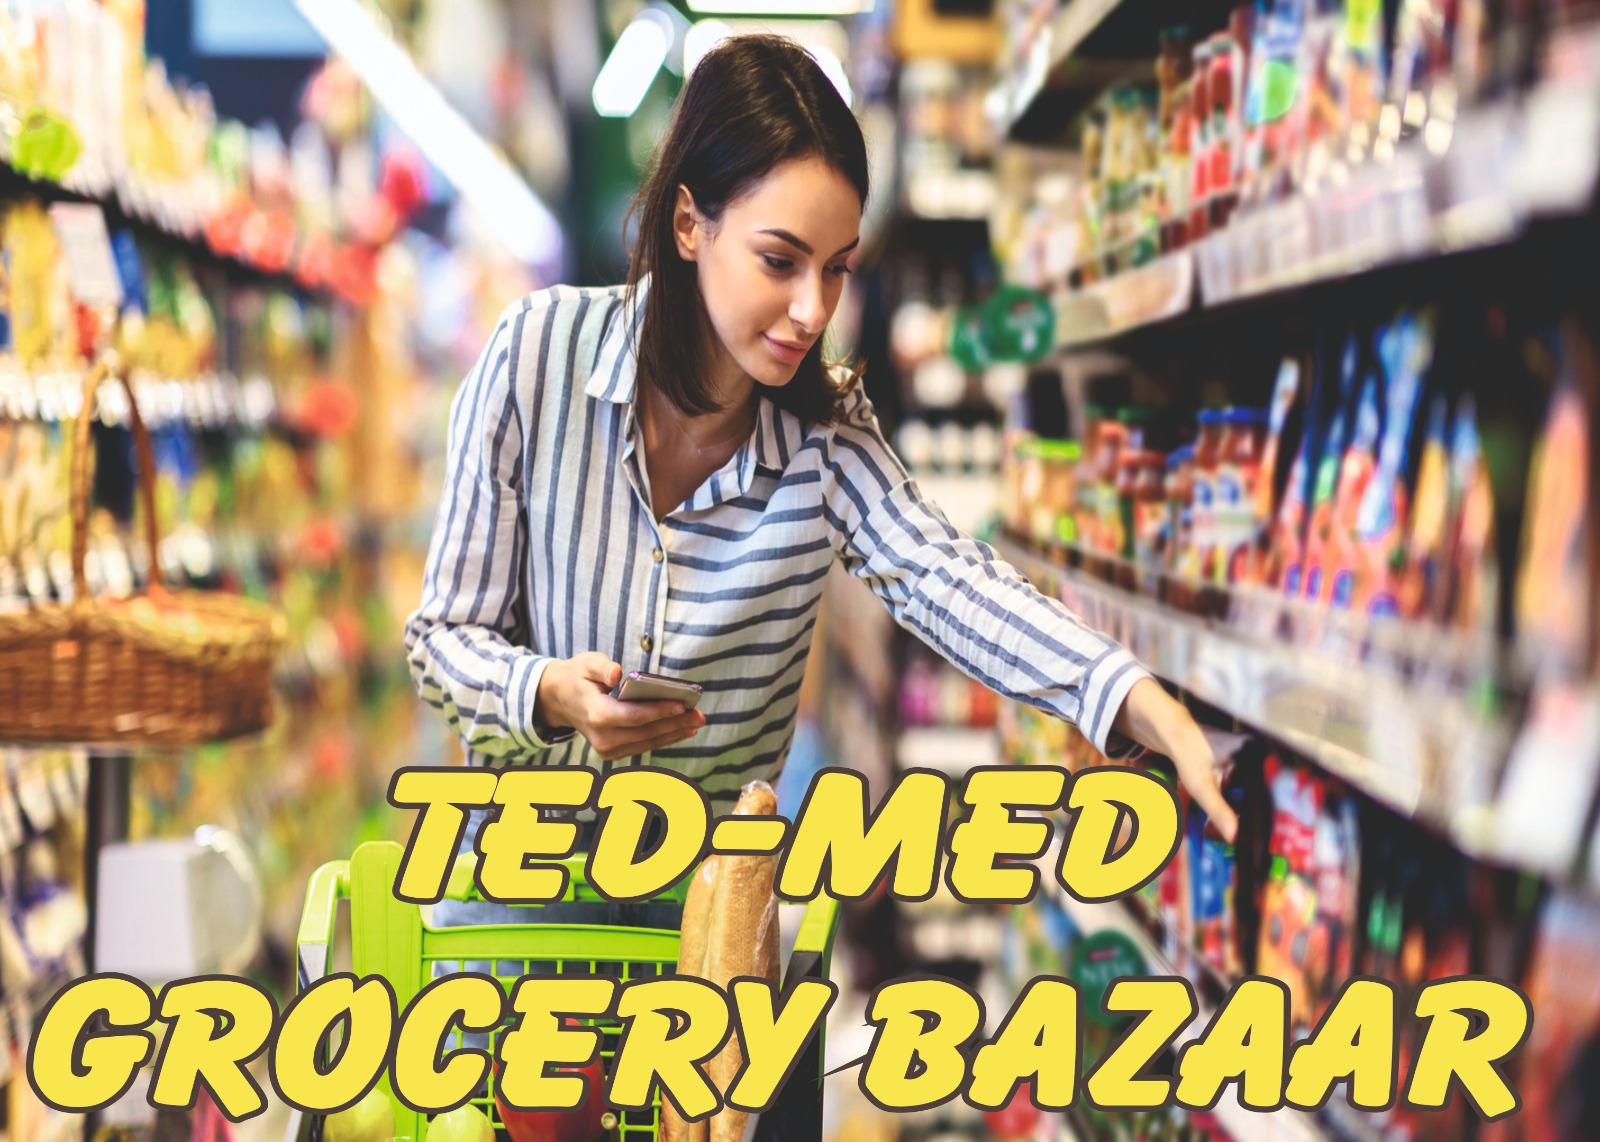 TED-MED GROCERY BAZZAR|Store|Shopping